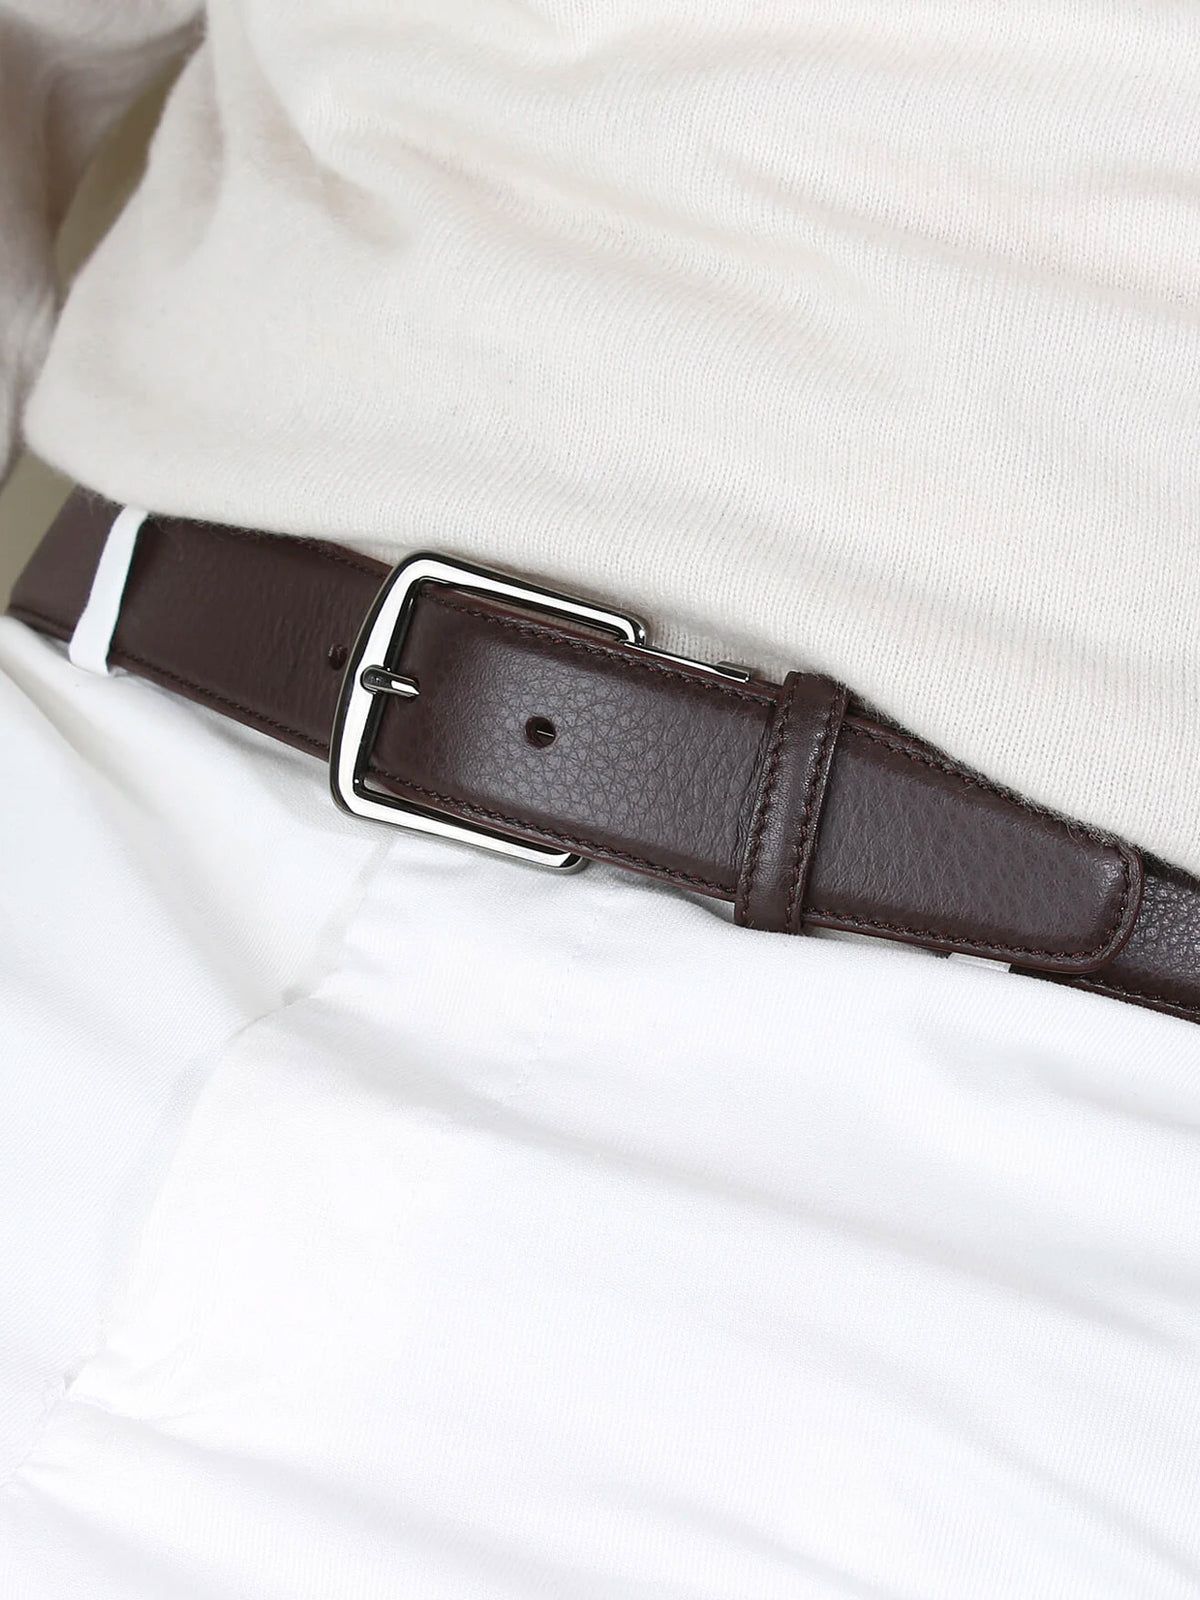 Mens Luxury Belts: Sophisticated and Stylish Accessories for Men